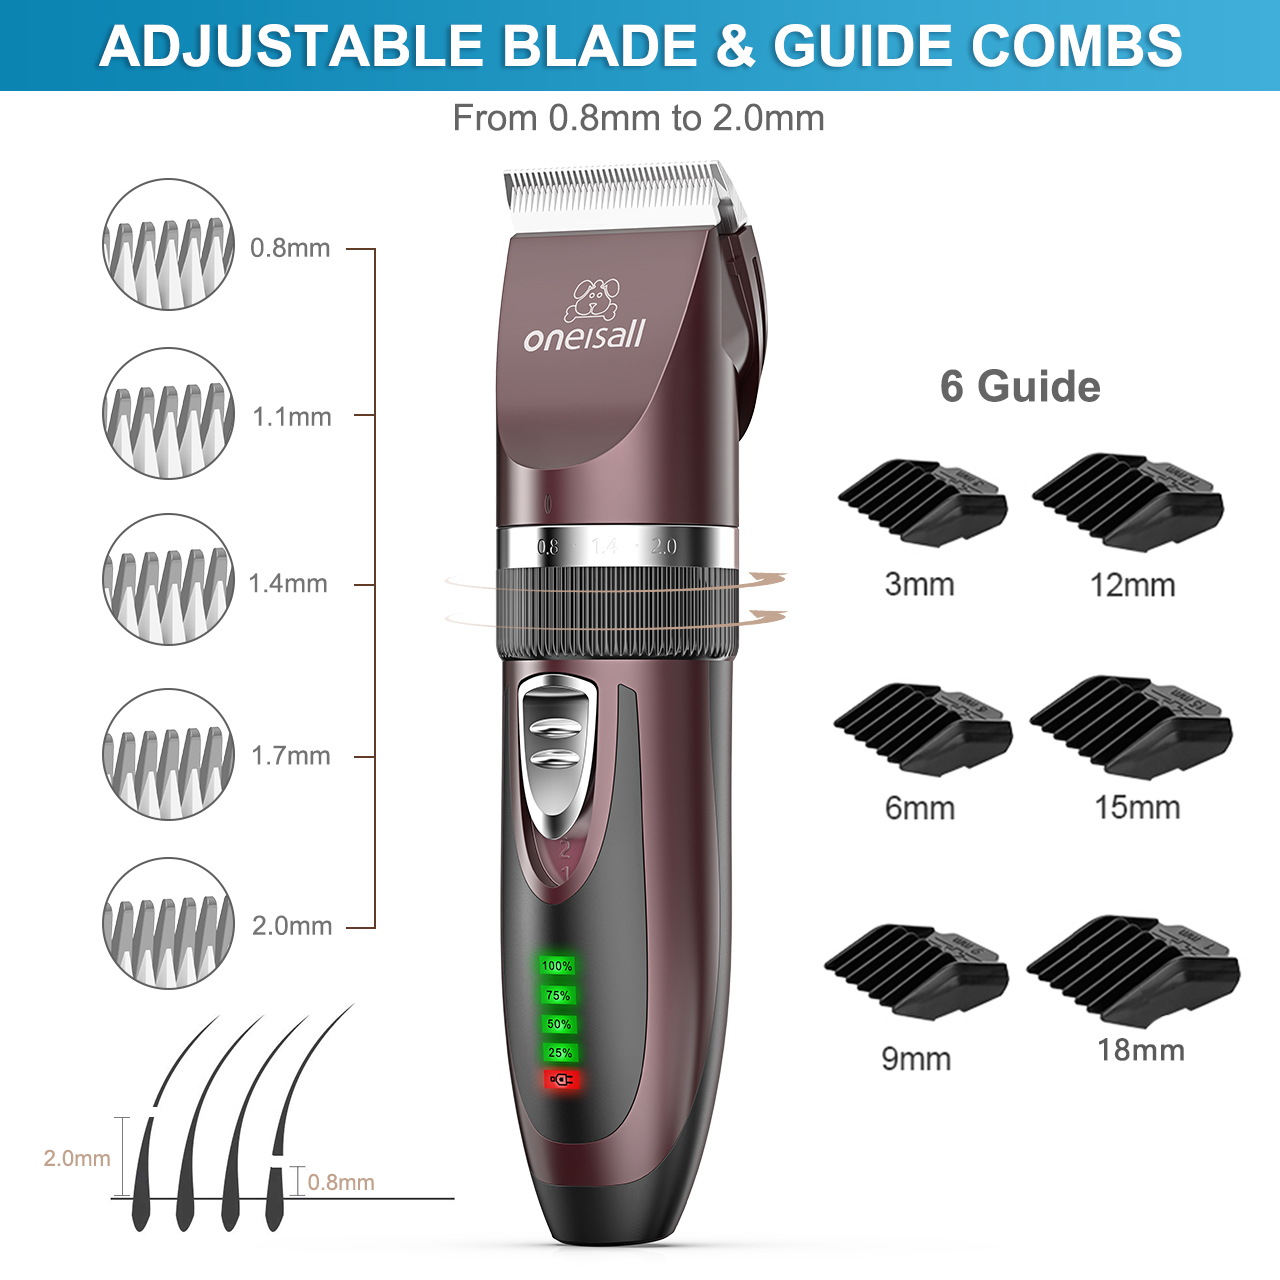 Oneisall Dog Clippers 50db Low Noise, 2-Speed Quiet Dog Grooming Kit  Rechargeable Cordless Pet Hair Clipper Trimmer Shaver for Small and Large Dogs  Cats Animals Rose(Dark)